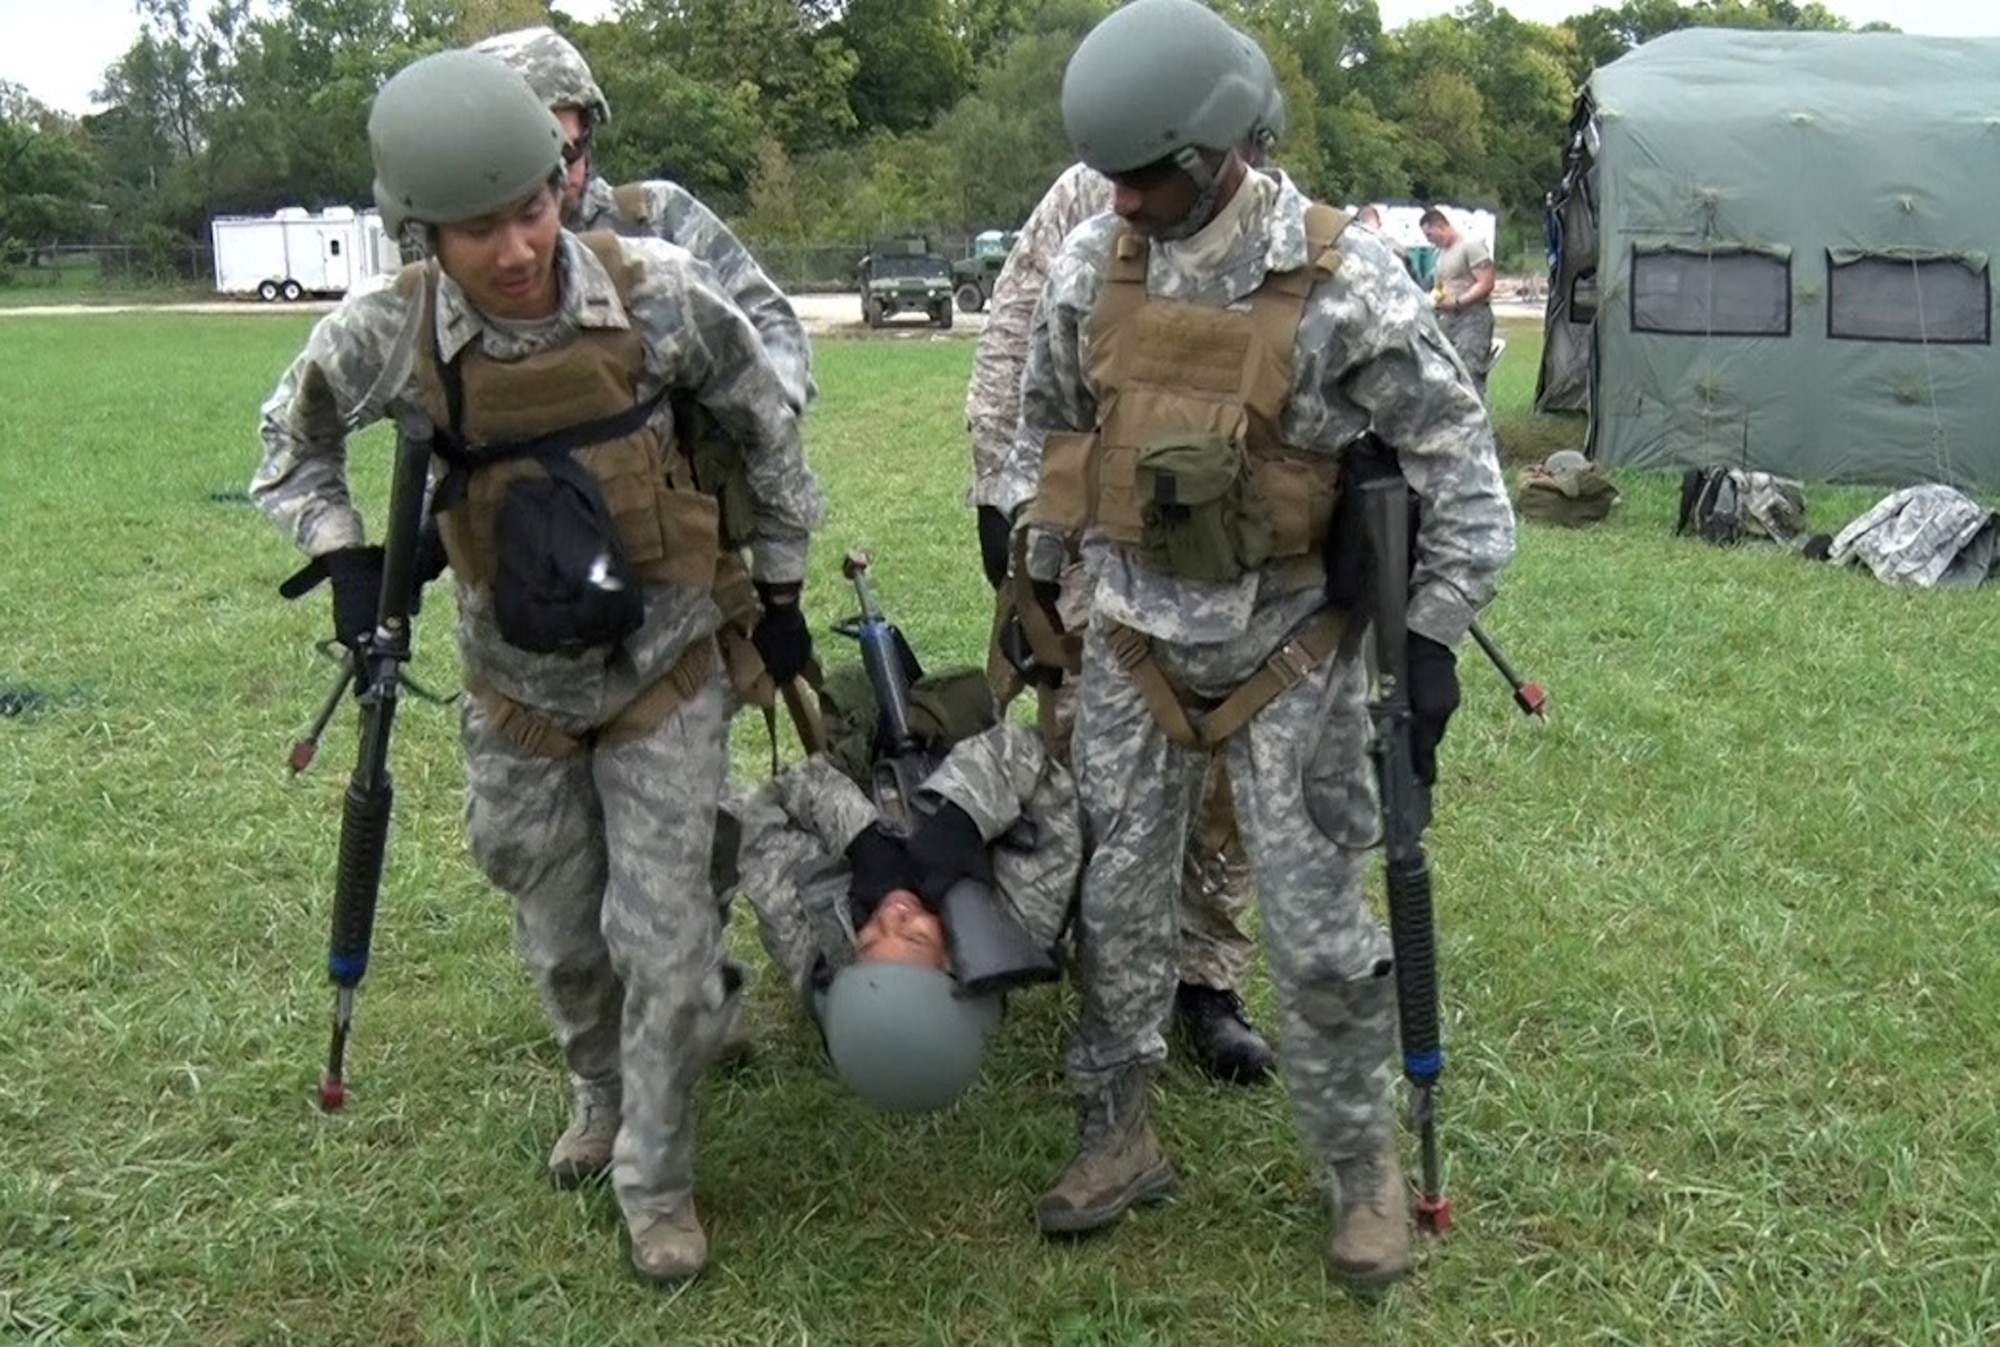 A wide range of technologies, including Ohio-based Hyprum’s Tactical Mobility System (pictured) were integrated into training missions or demonstrated at Operation Tech Warrior in late September. (Courtesy photo)